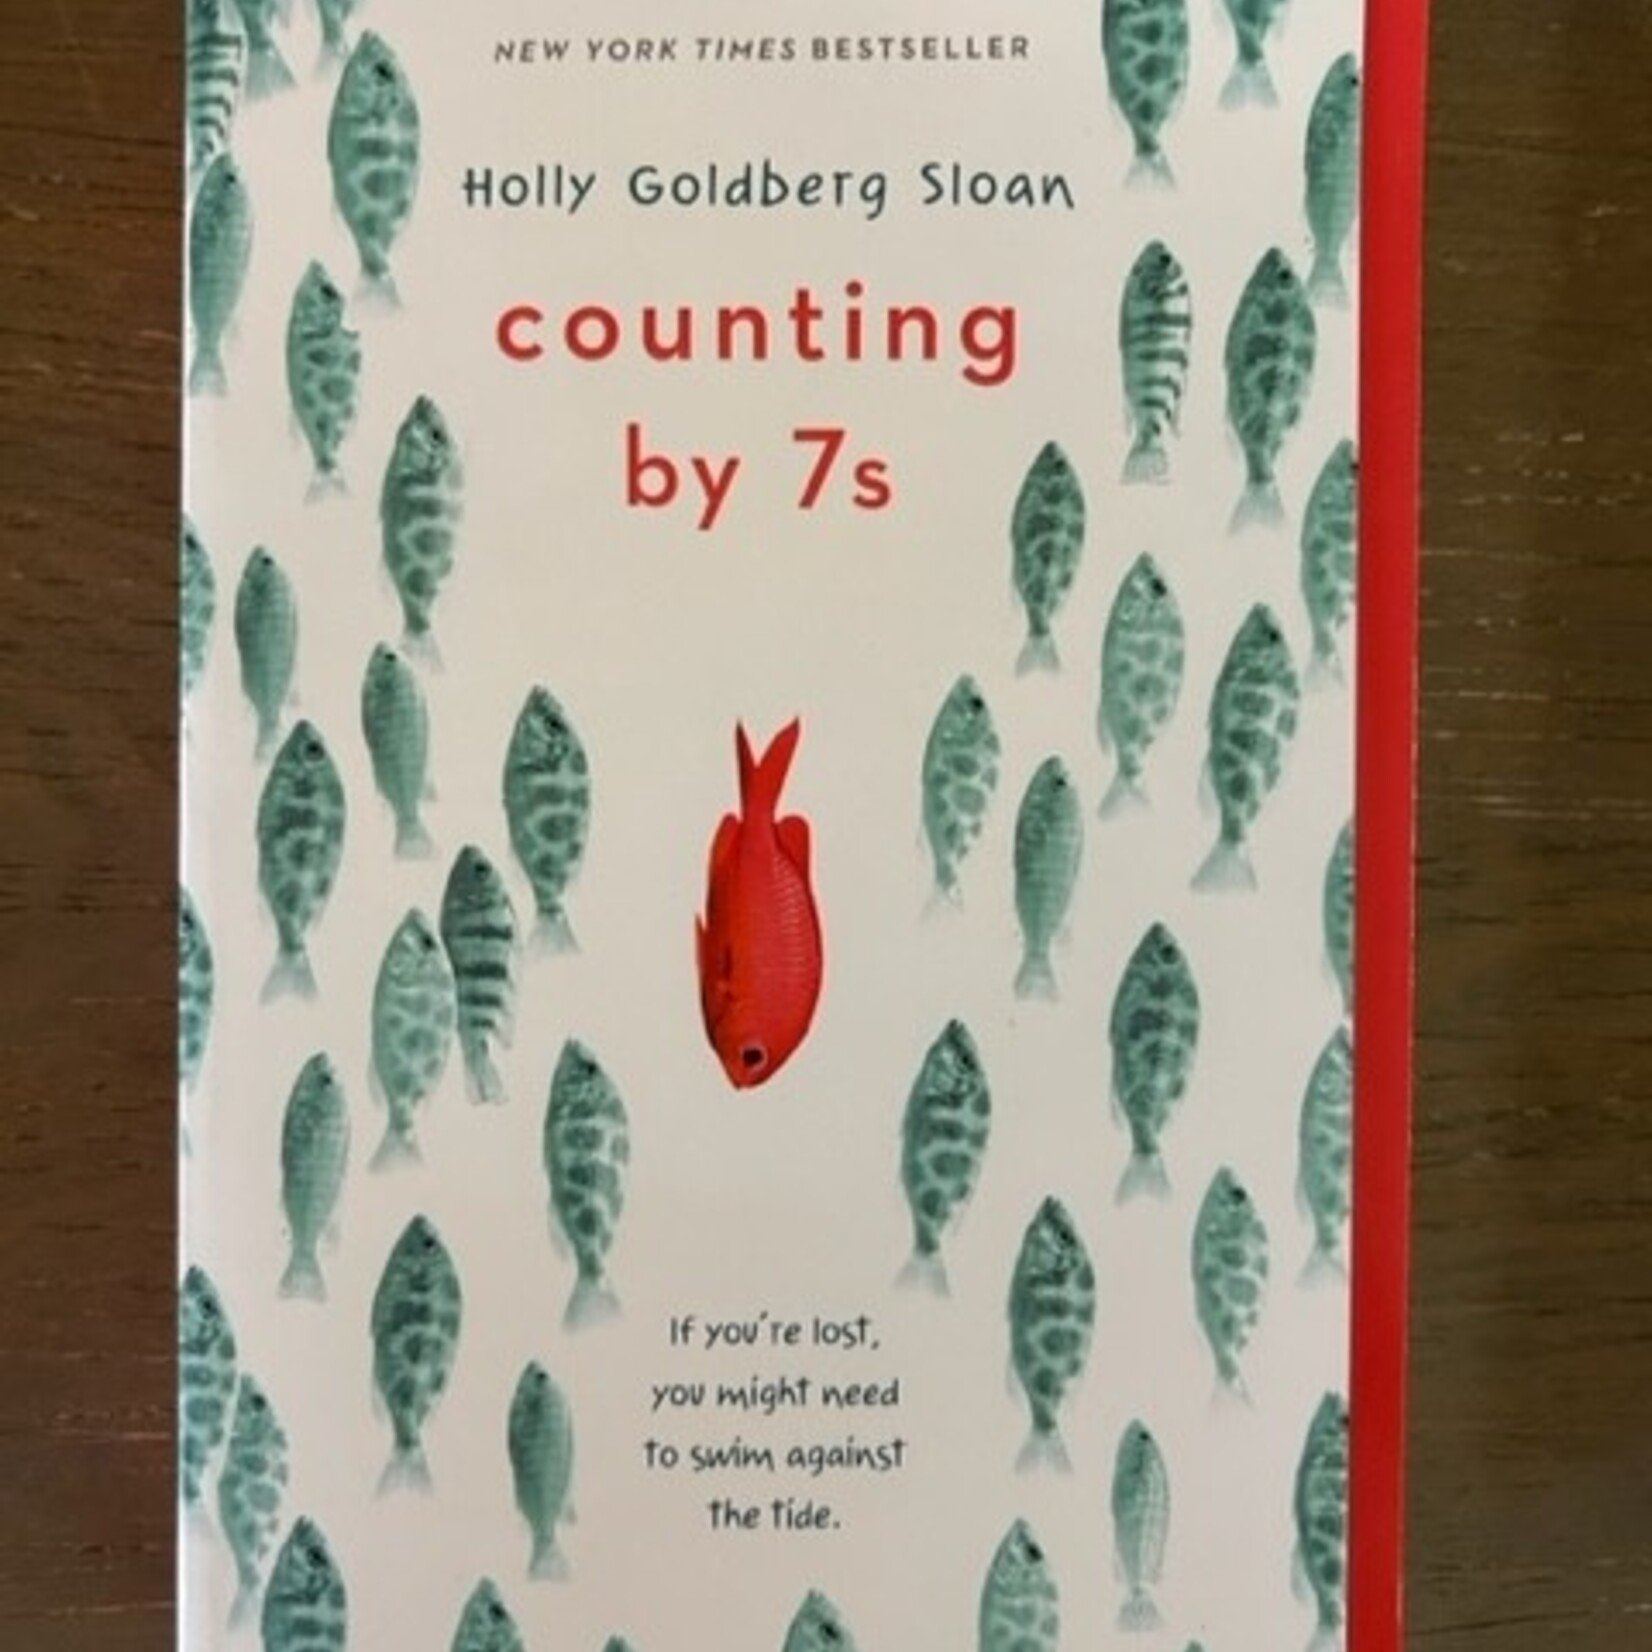 COUNTING BY 7'S